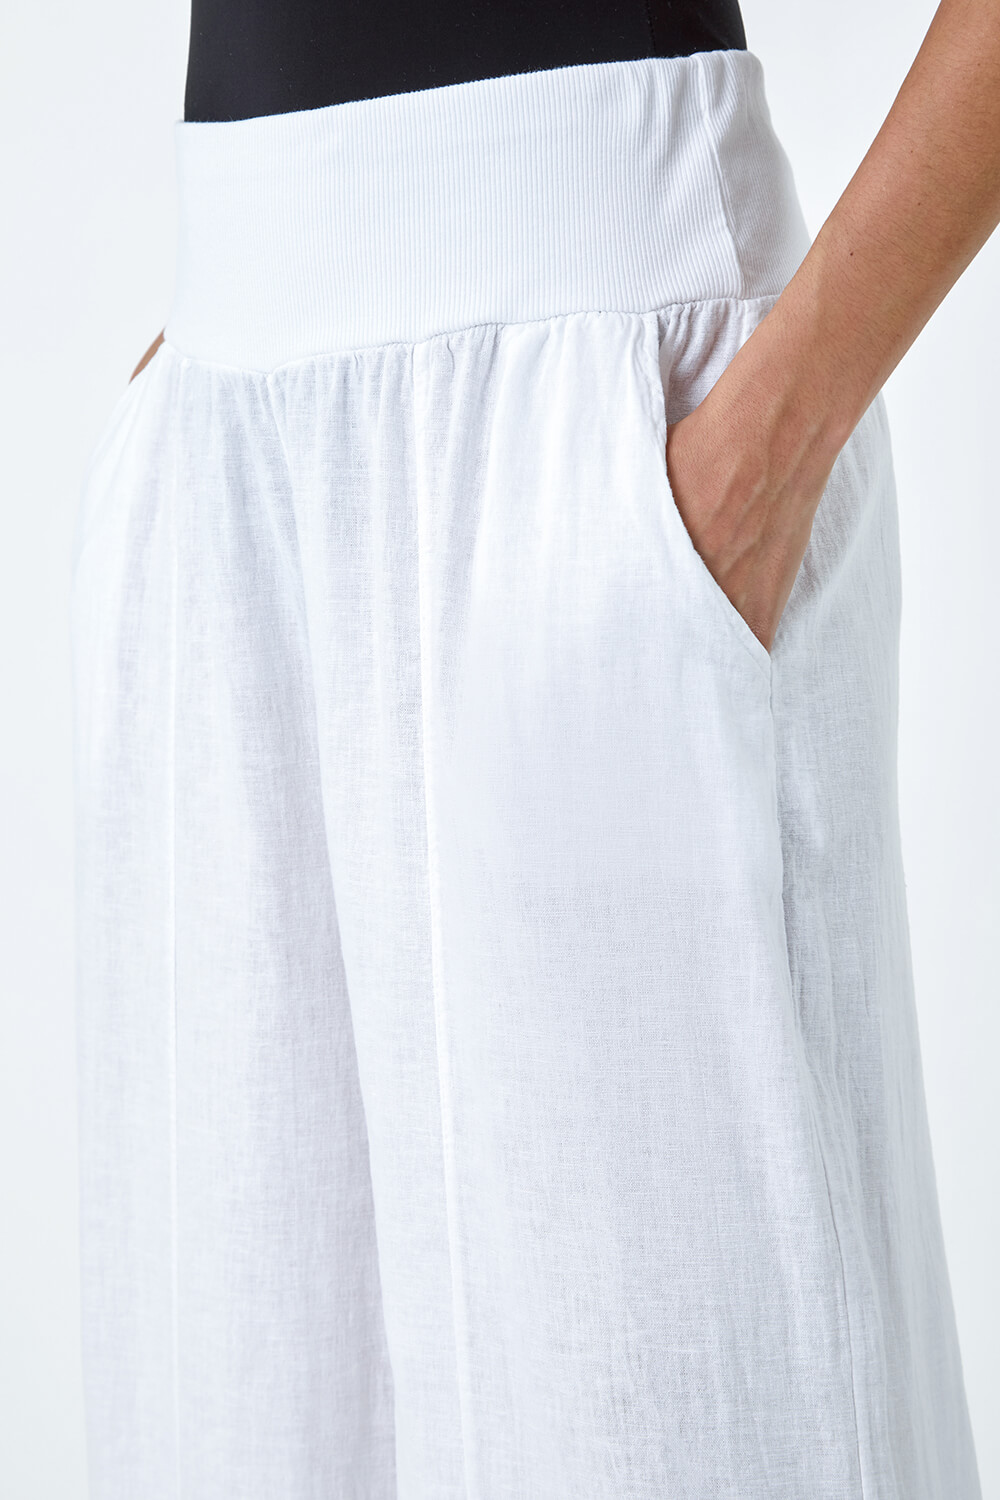 White Linen Blend Stretch Waist Culottes, Image 5 of 5